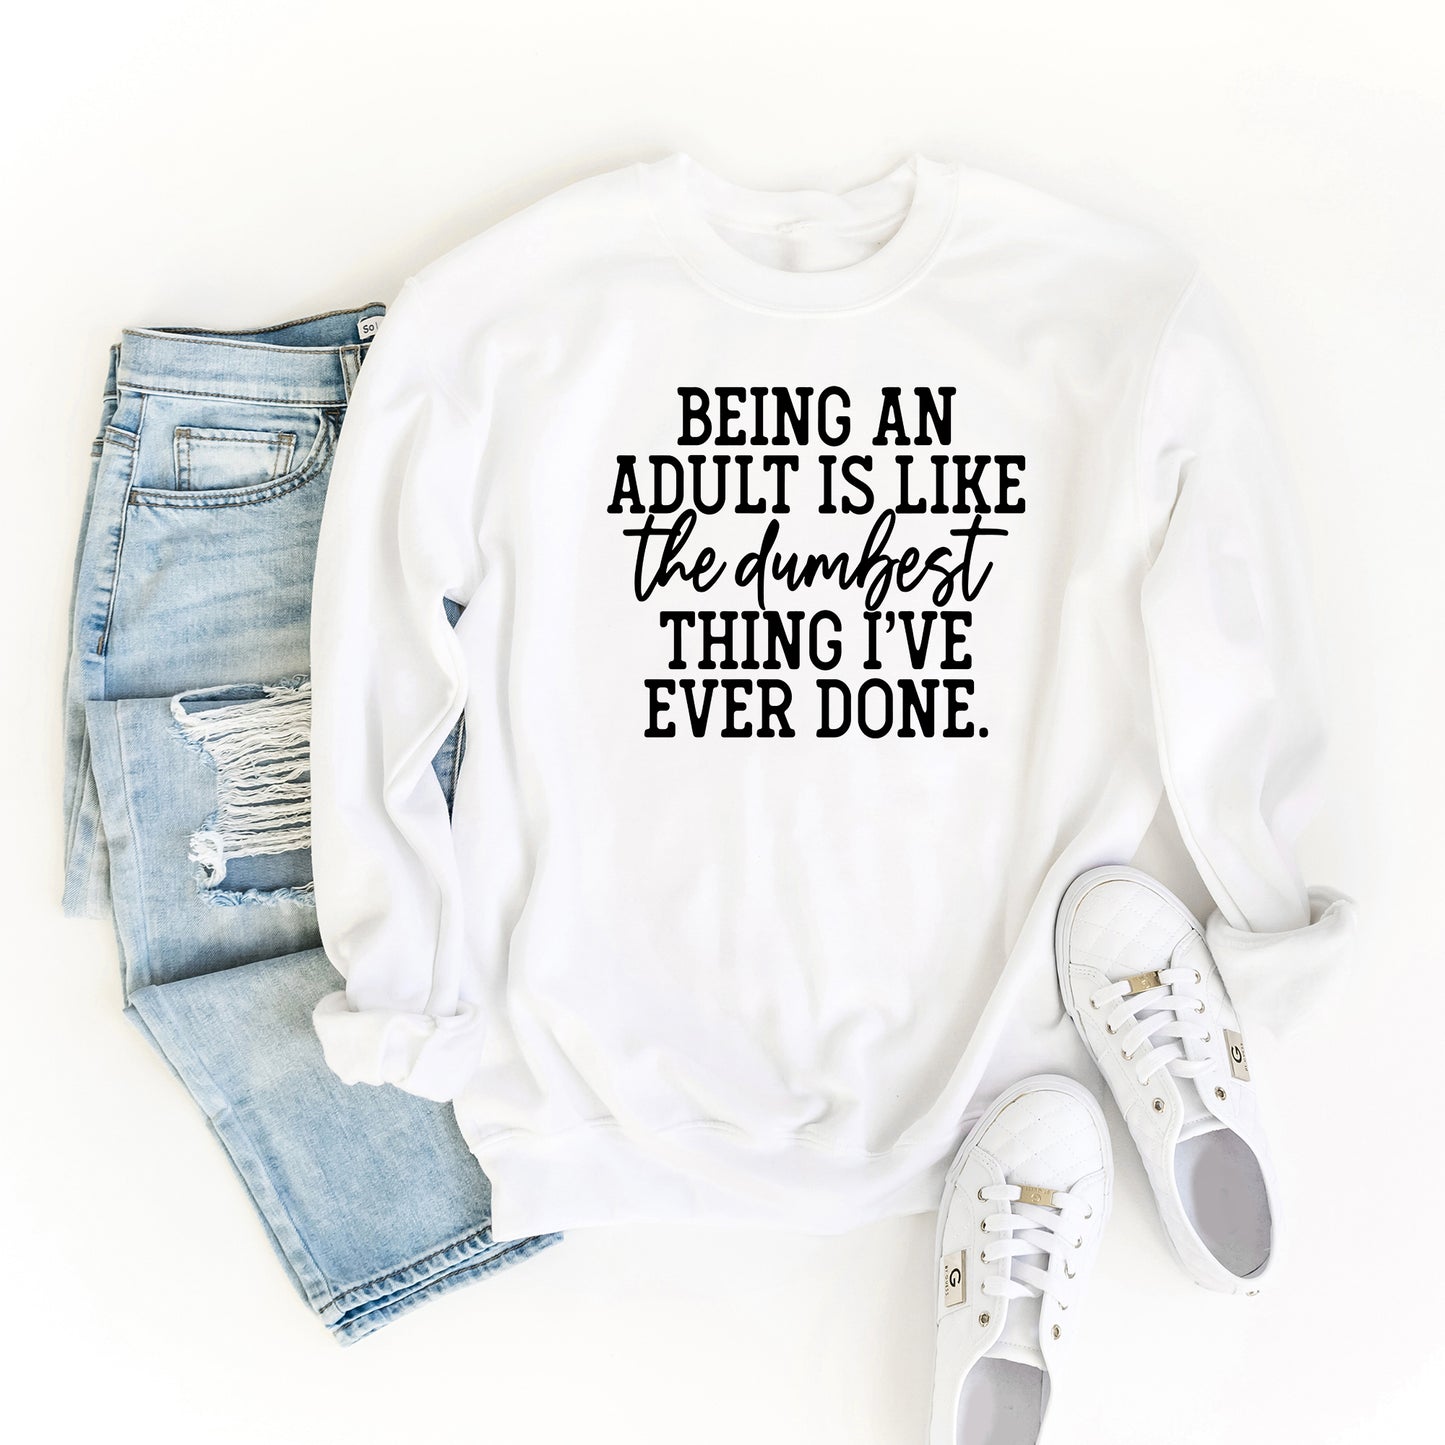 Being an Adult is Like the Dumbest | DTF Transfer